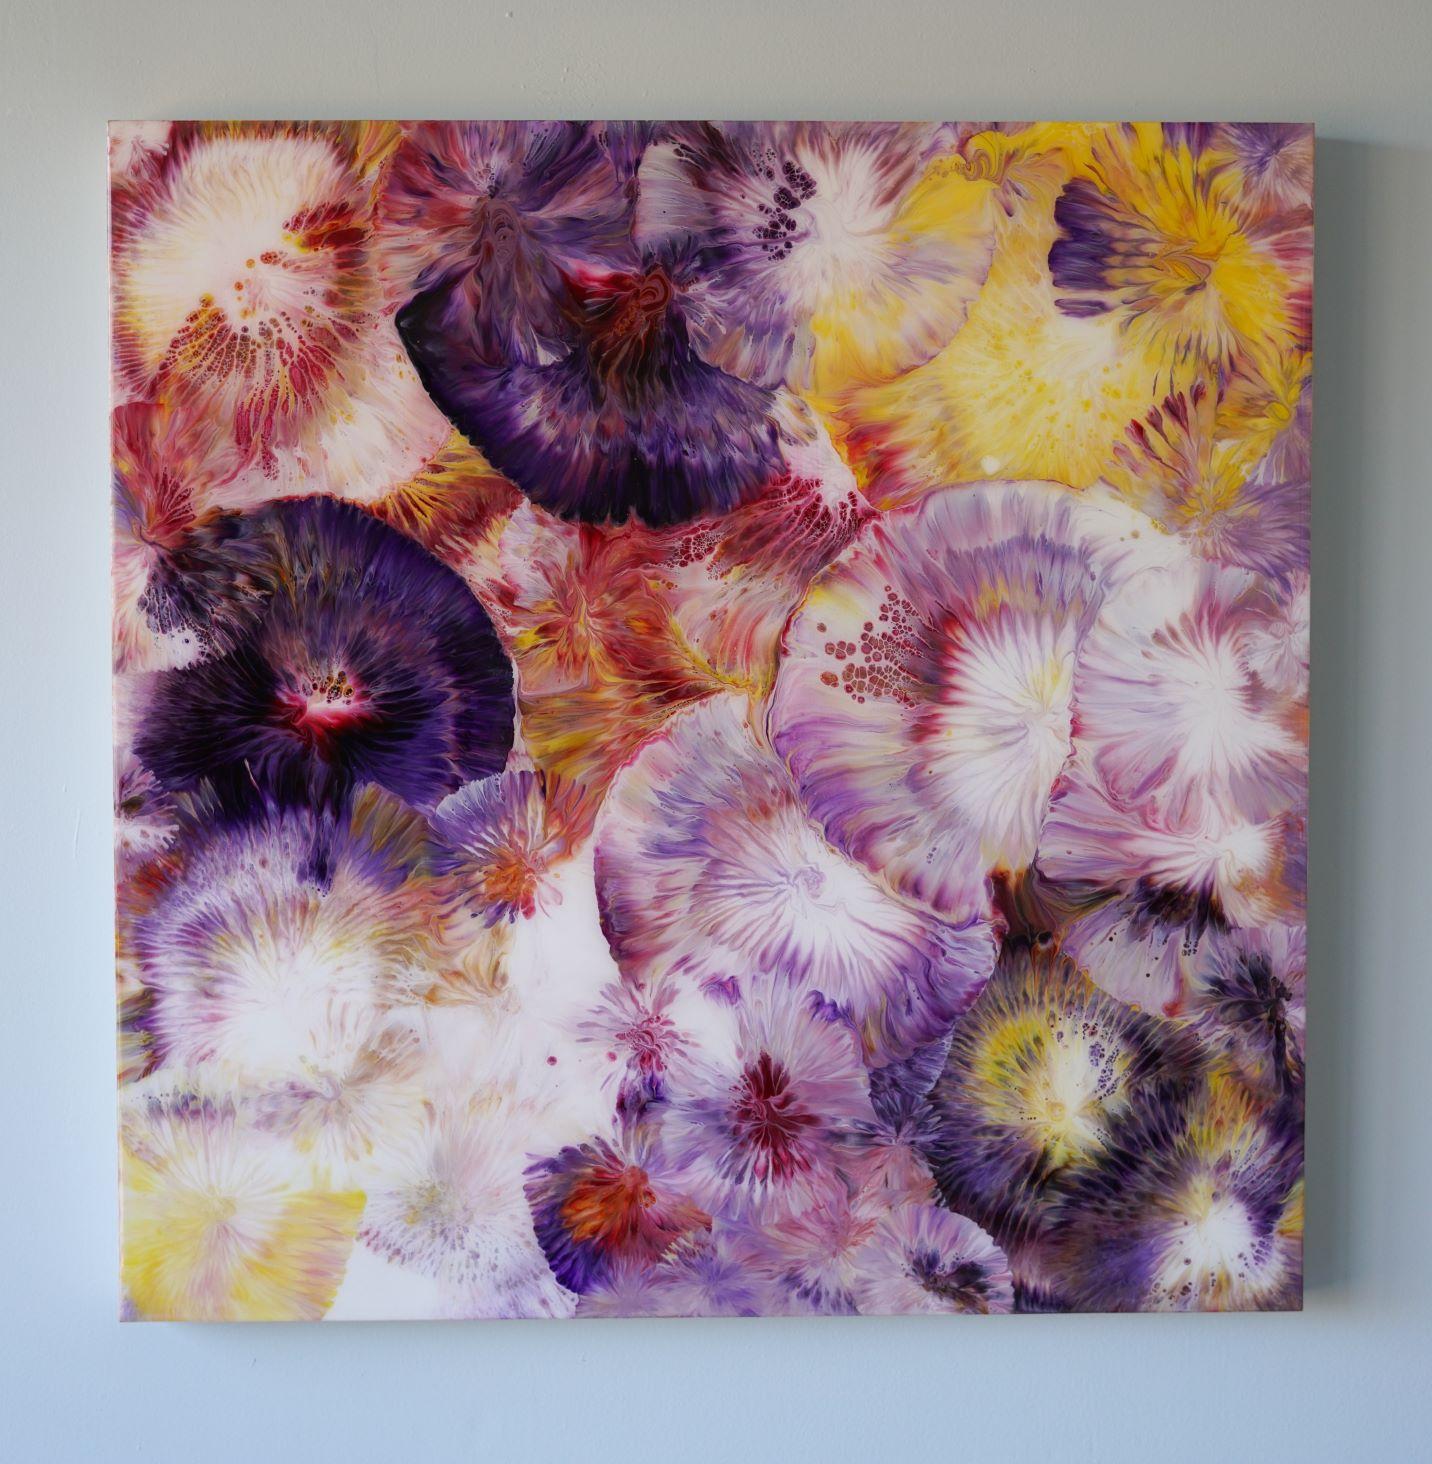 Celebrate No. 10 by Jennifer Glover Riggs is an acrylic and Resin painting on Wood.  It is 30 x 30 .  It filled with purple and yellow colors and movement.

Glover Riggs is best known for creating organic looking multi layered artworks with acrylic